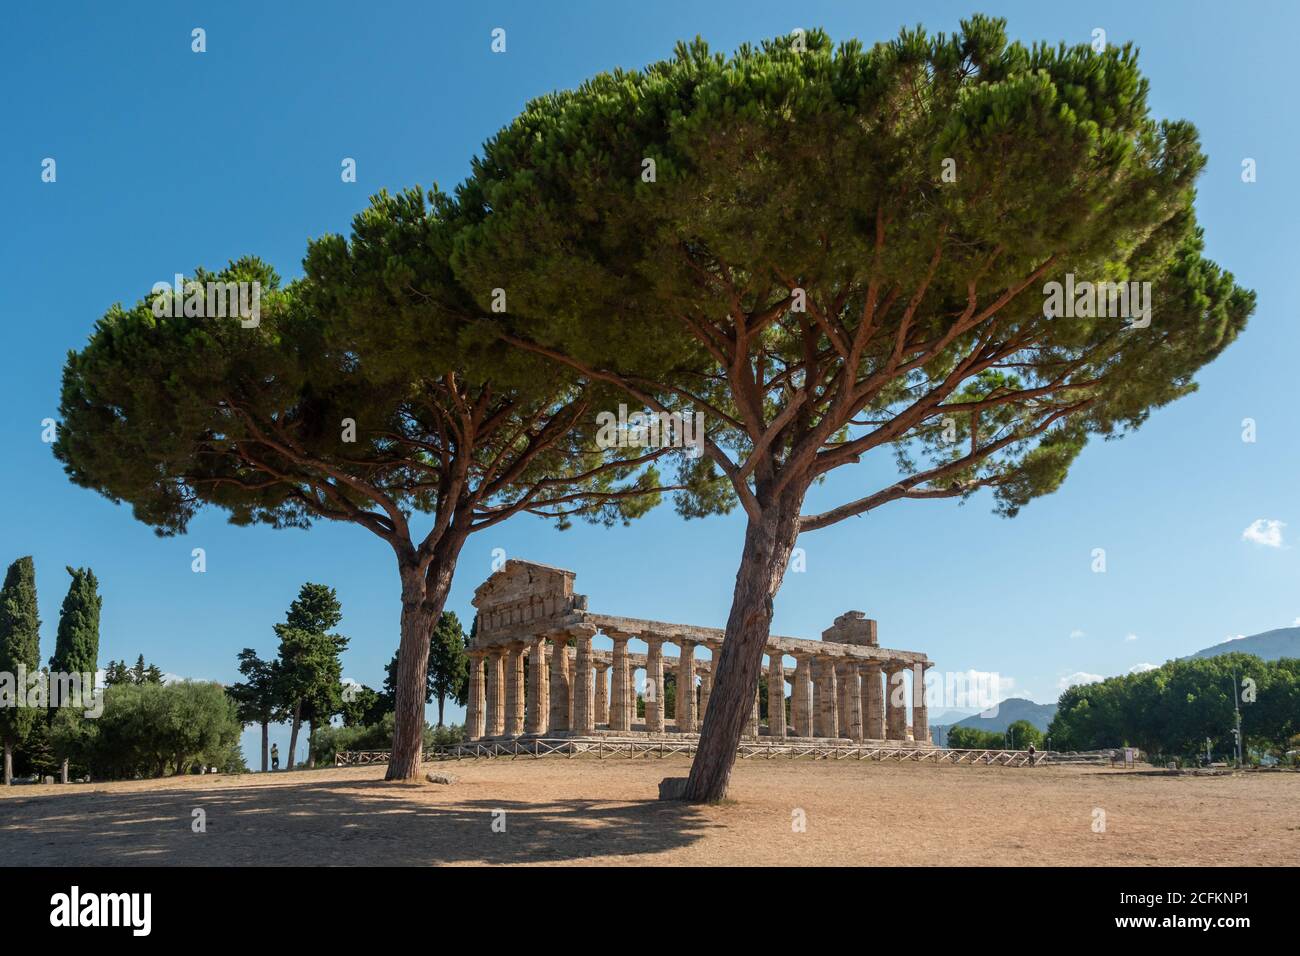 Ancient Greek Temple of Athena or Ceres in Paestum, Italy with Doric Columns and  Olve Trees Stock Photo